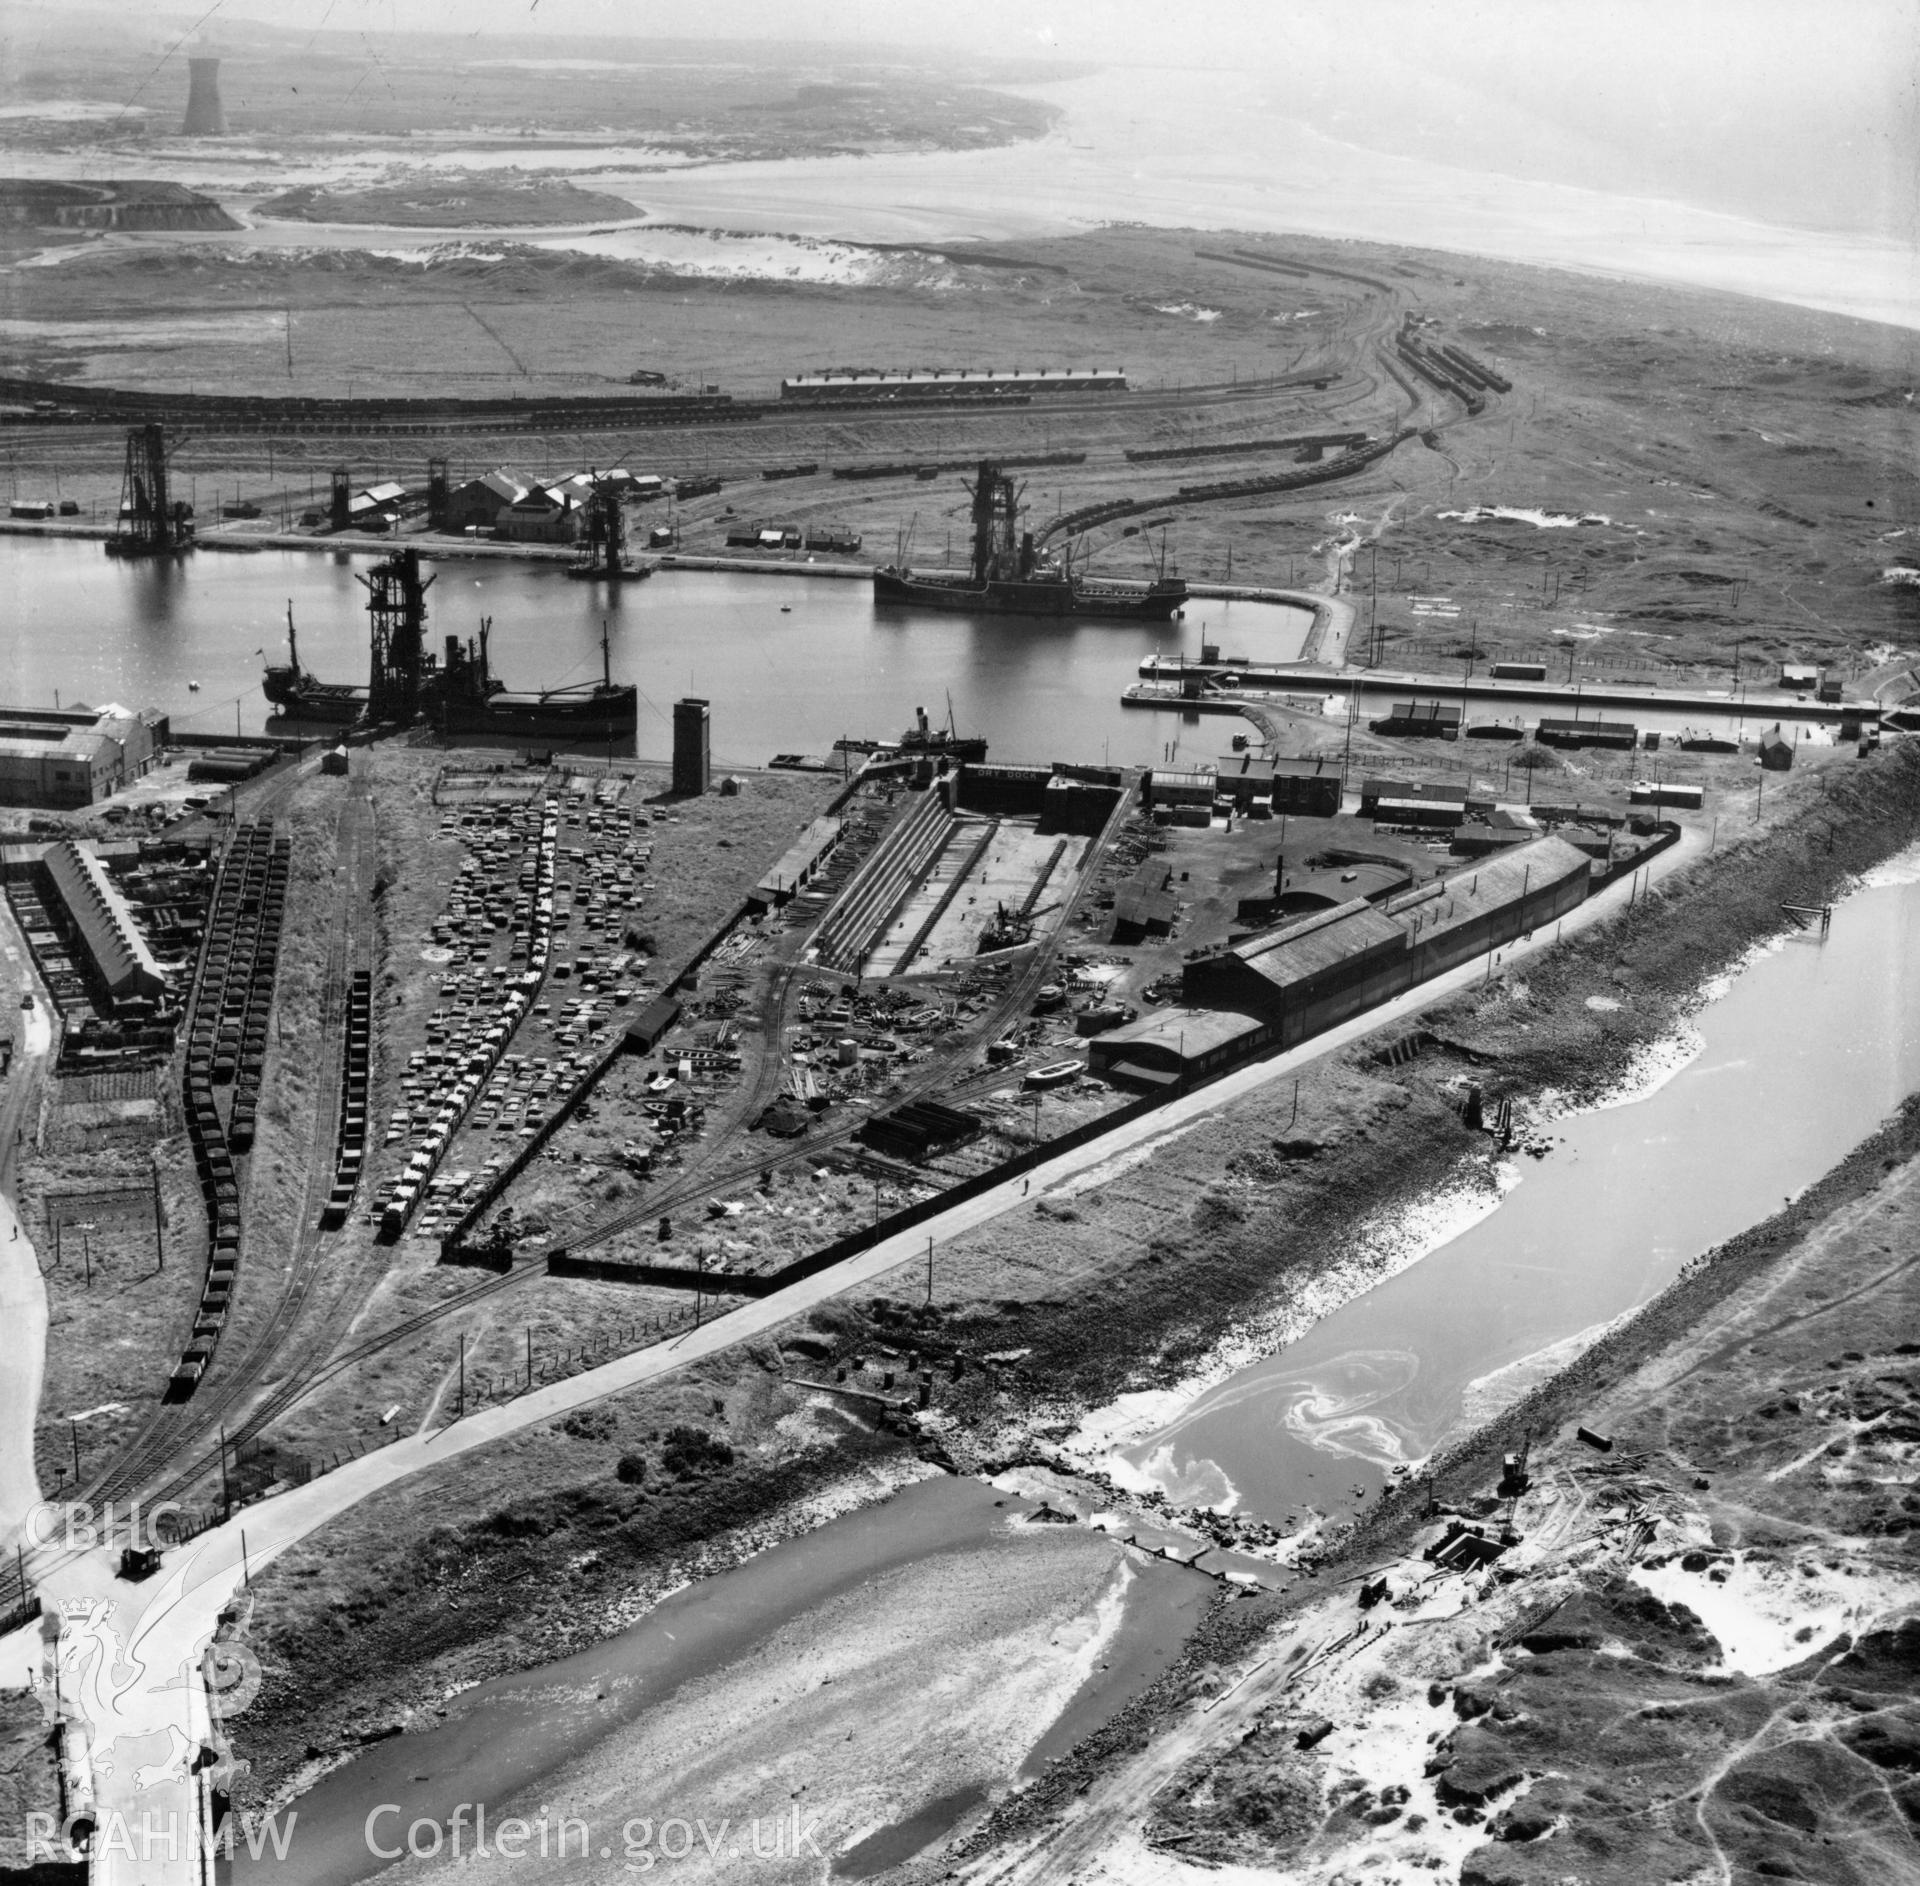 View of dry, new and old docks and entrance channel, Port Talbot. Oblique aerial photograph, 5?" cut roll film.